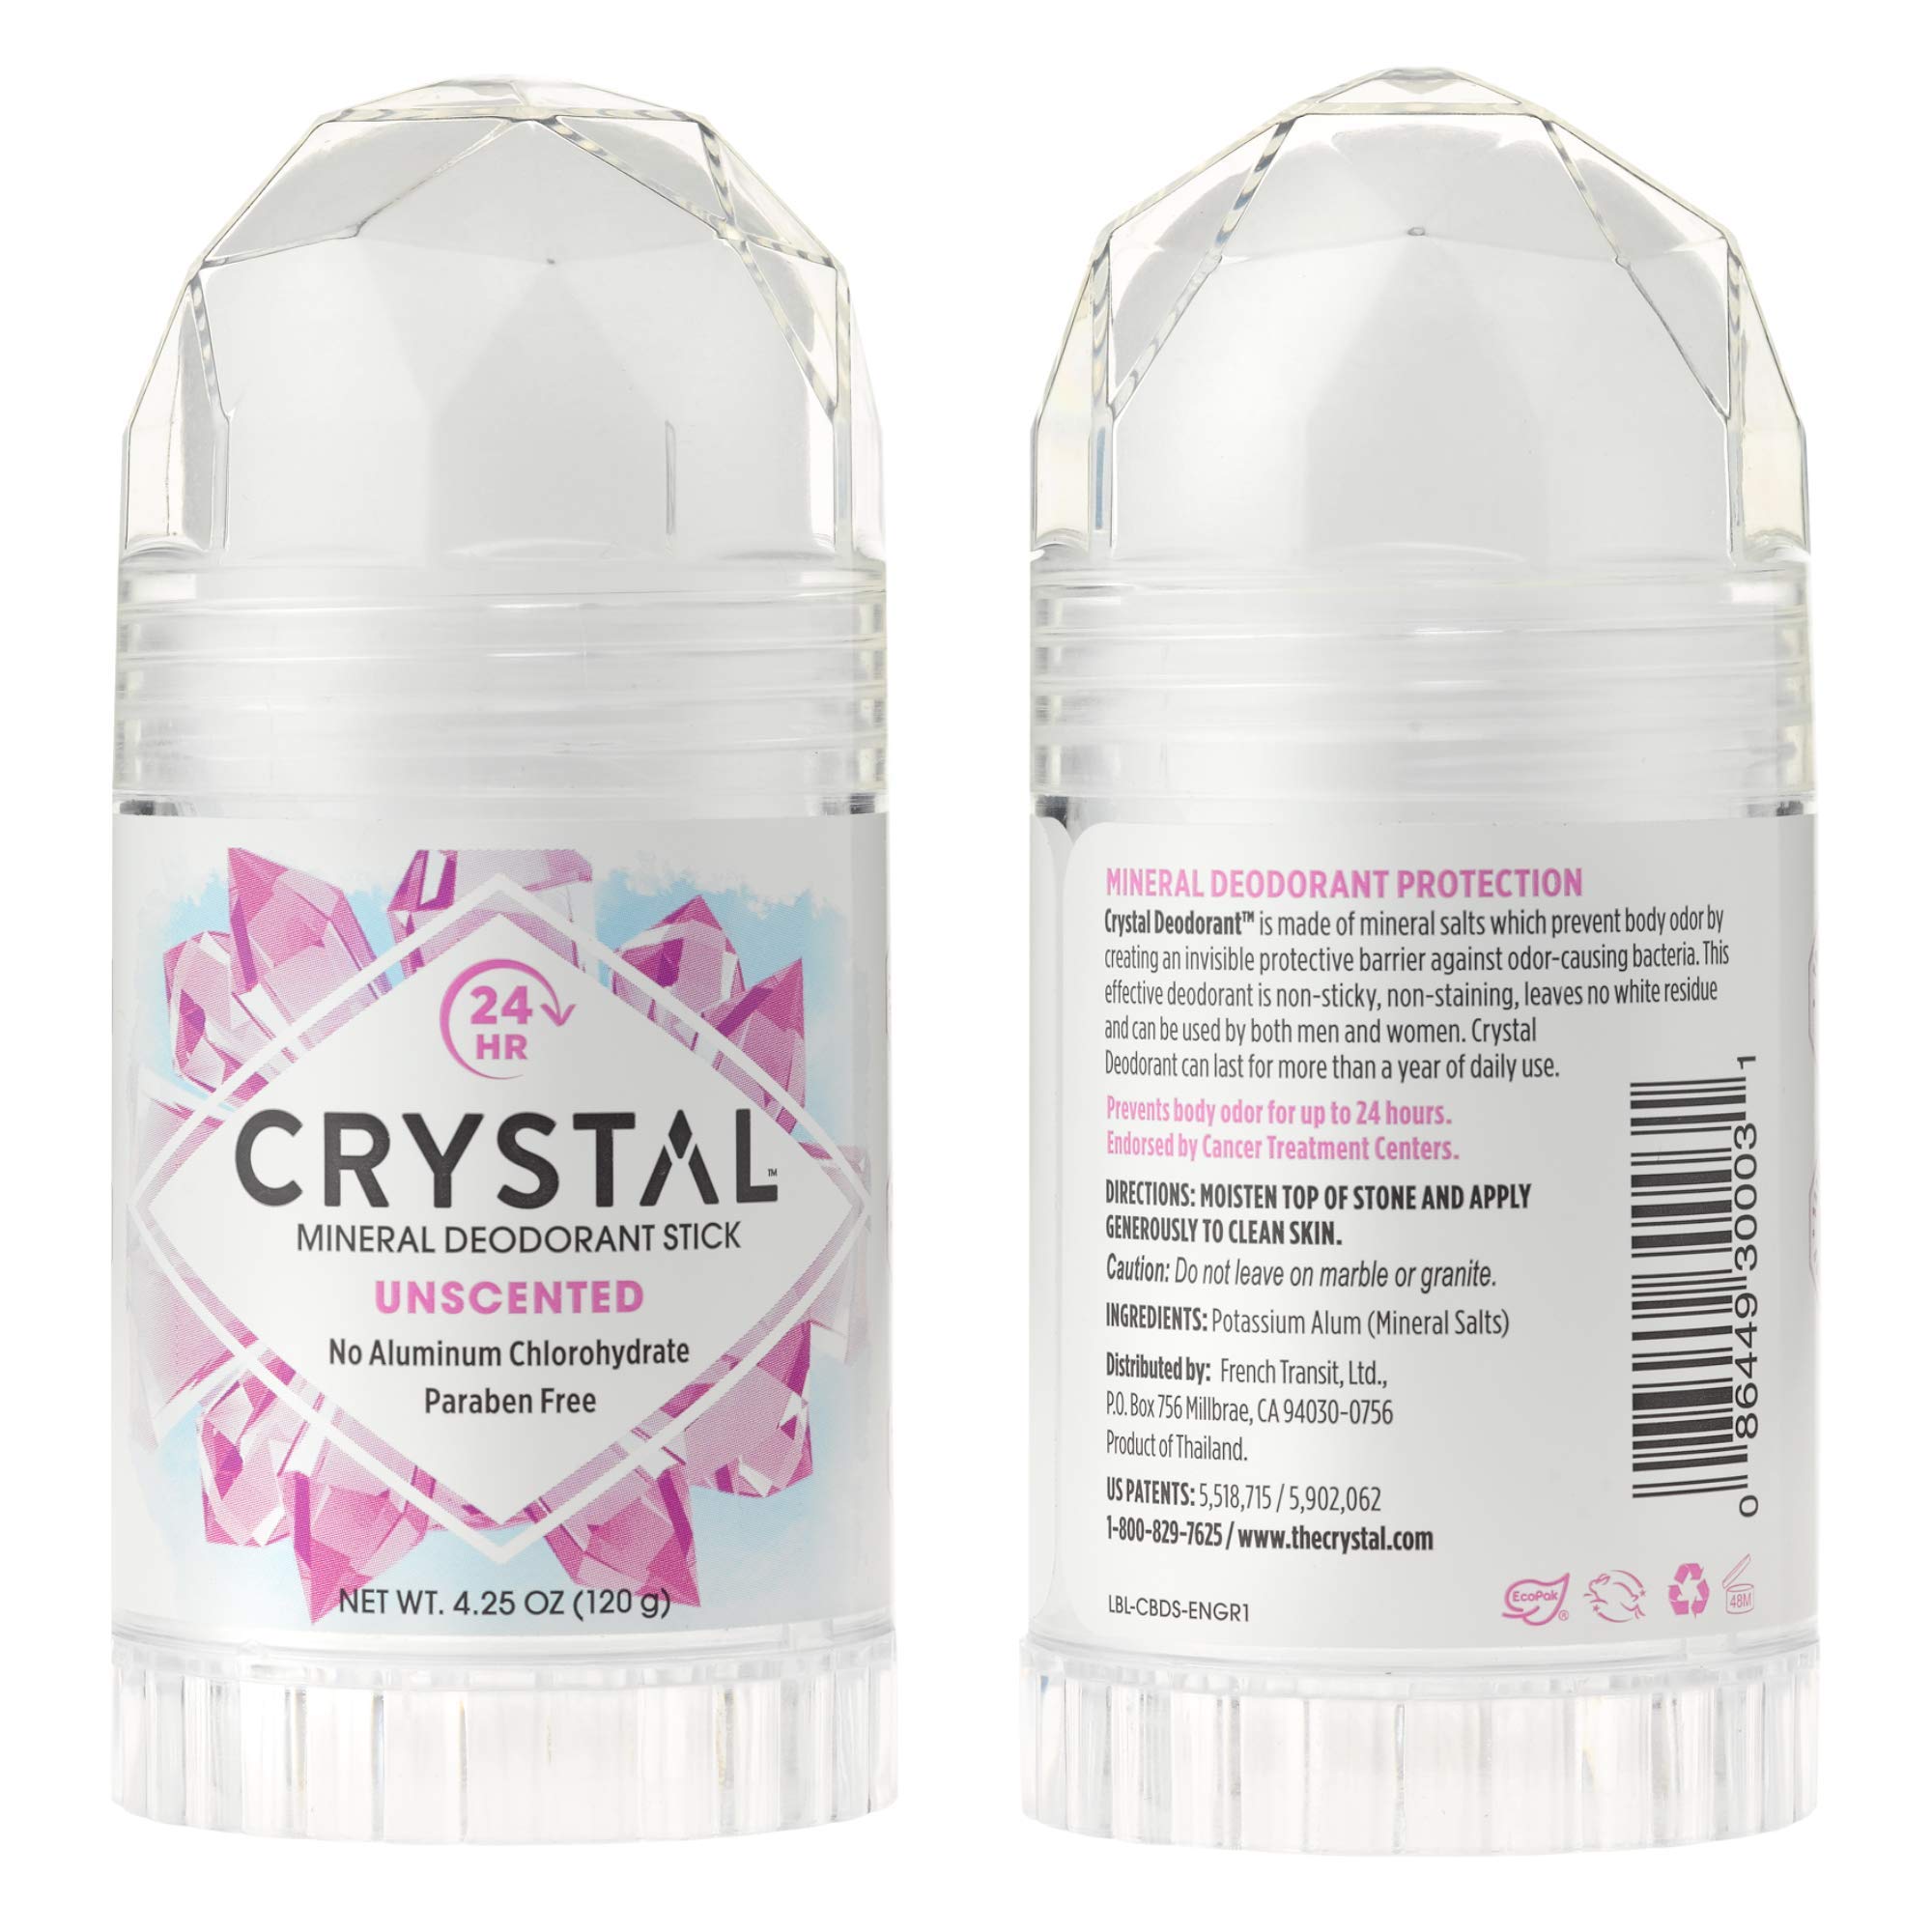 Crystal Deodorant, Unscented, Natural Crystal Deodorant Stick, Mineral  Salt Deodorant, Salt Deodorant